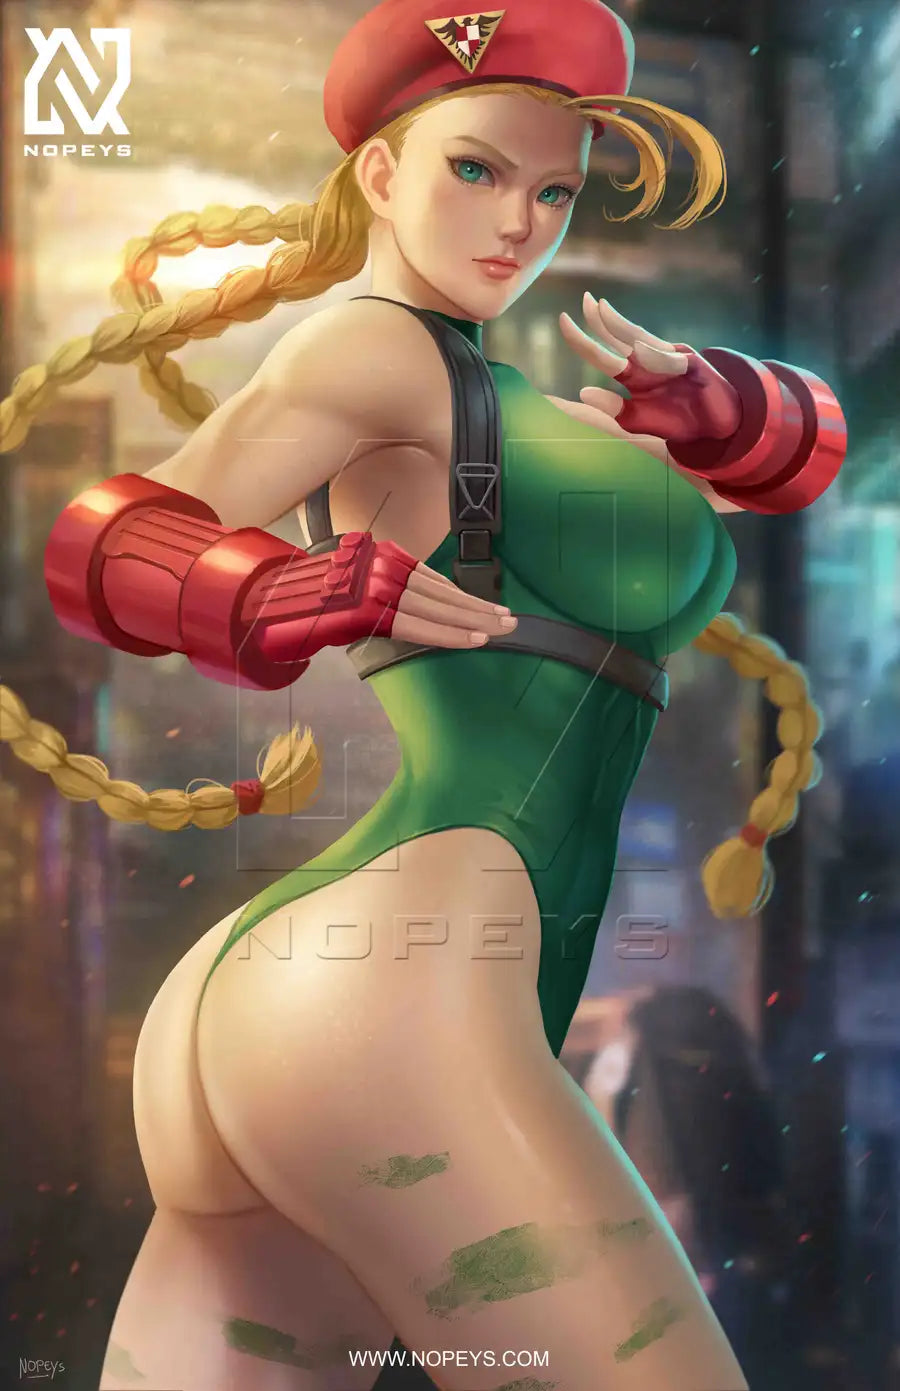 Better Intensive Green Cammy Classic Costume SF5 Color at Street